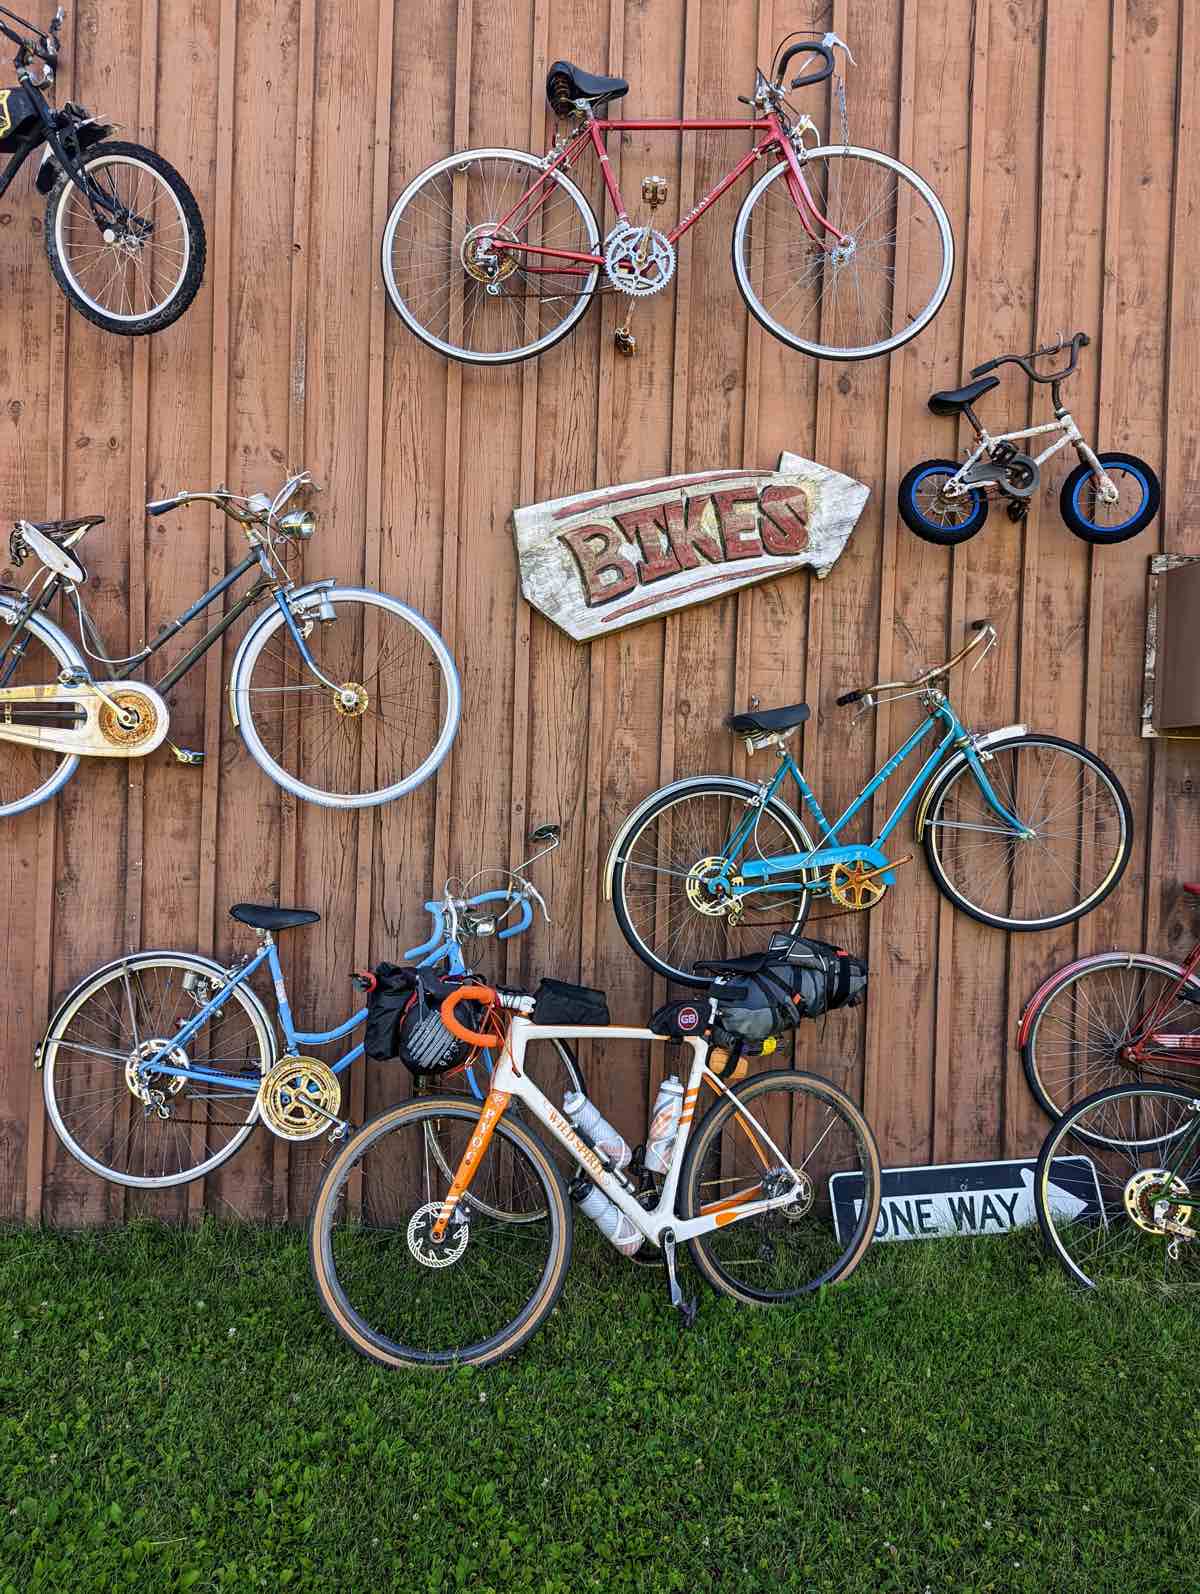 bikerumor pic of the day a bicycle is posed in front of a wood wall that has bicycles hung all over it and a sign in the shape of an arrow that says "bikes"